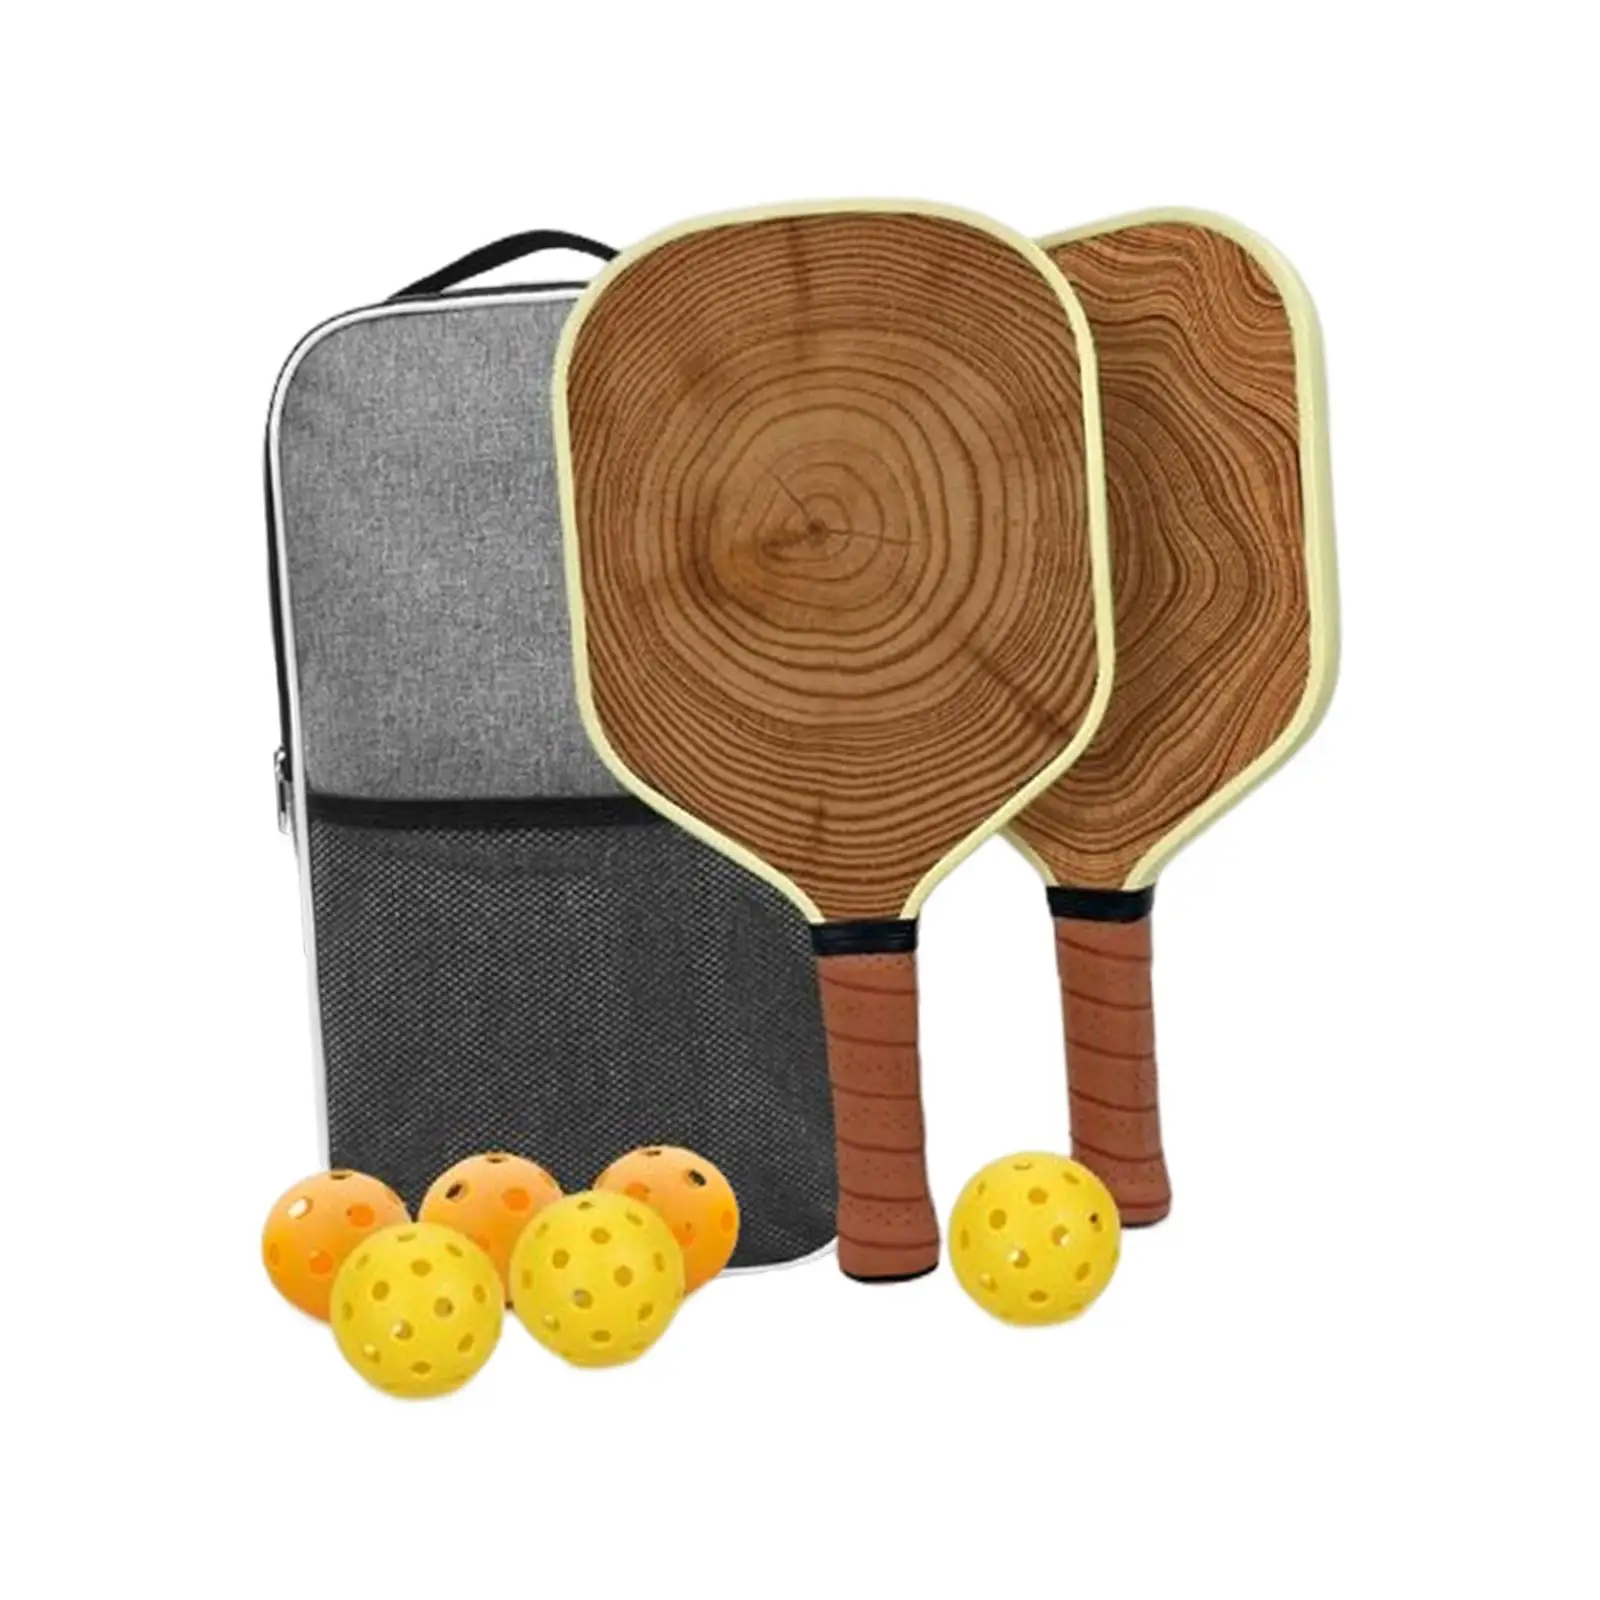 Lightweight Pickleball Paddles Set with Storage Bag 6 Balls Racquets Pickleball Rackets for Indoor Outdoor Use Men Women Player